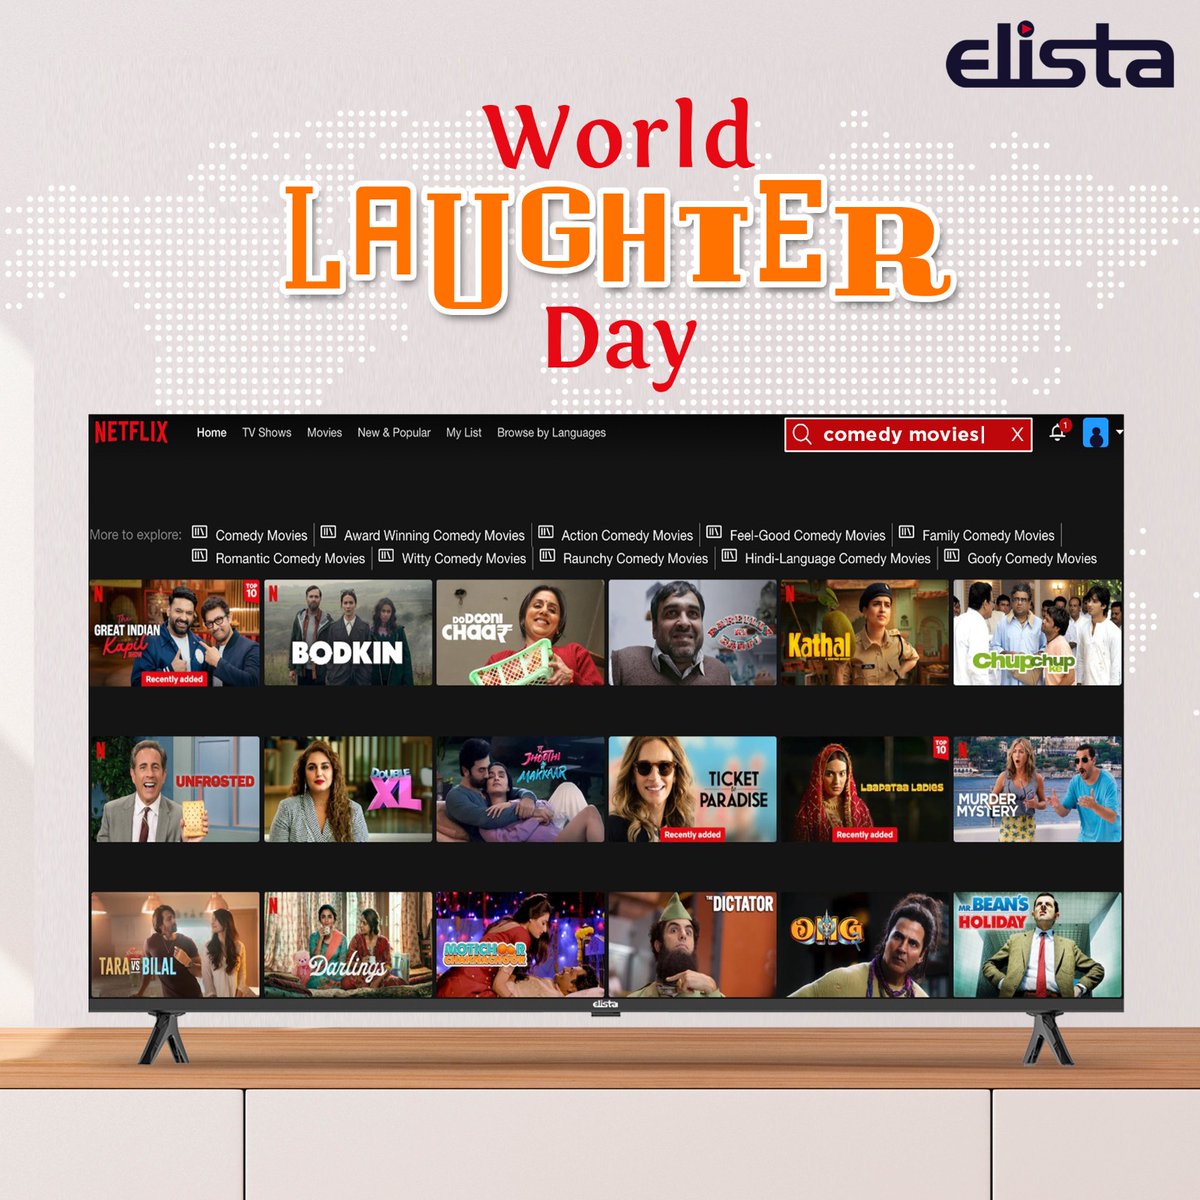 A day without laughter is a day wasted!

#WorldLaughterDay